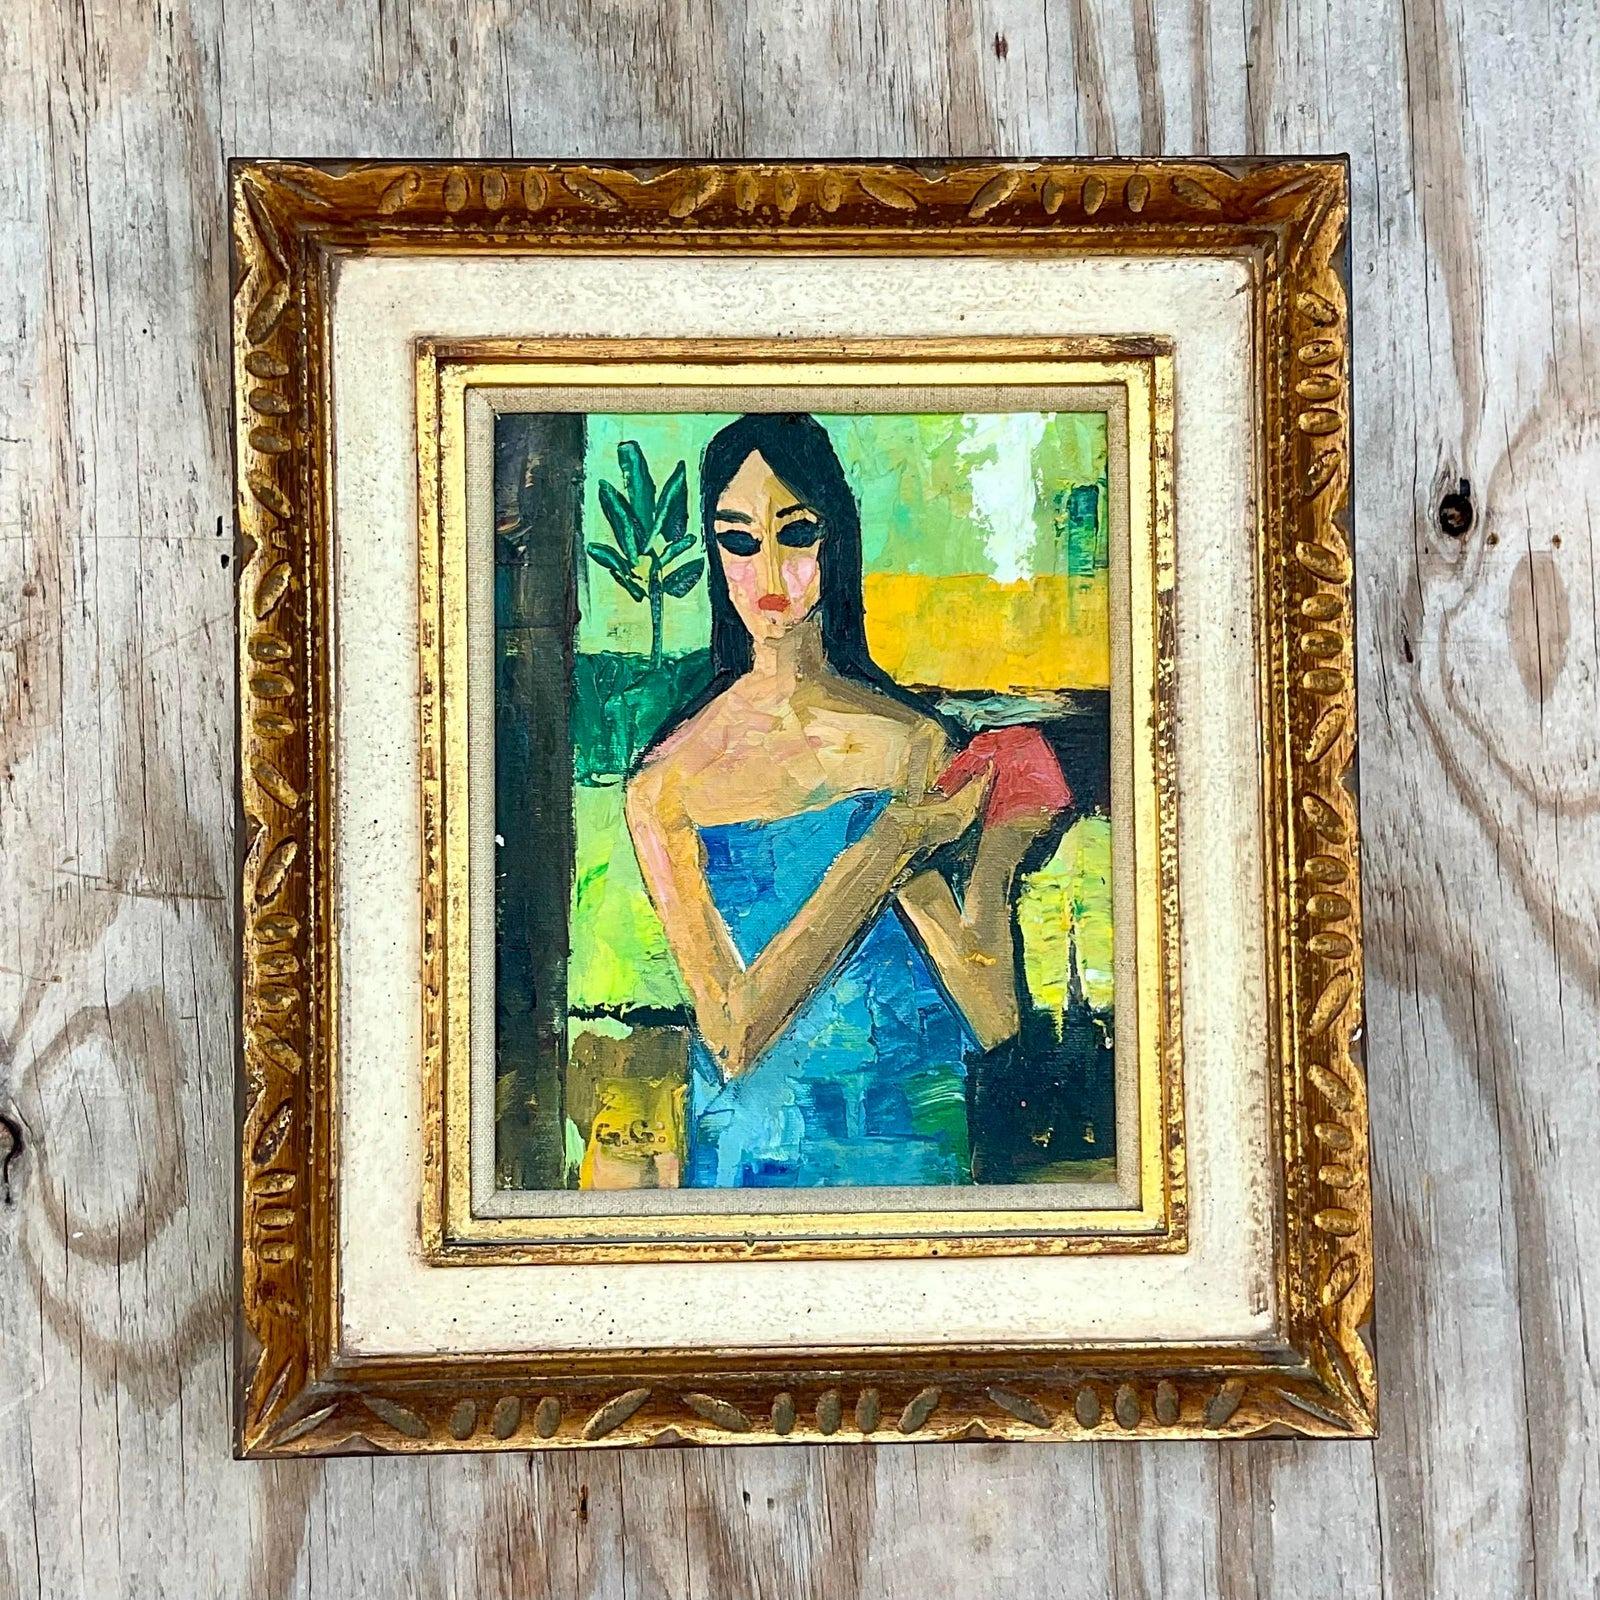 A fabulous vintage Boho original oil painting on canvas. A chic Abstract Expressionist of a young woman. Brilliant clear color in a thick impasto style. Signed by the artist. Acquired from a Palm Beach estate.